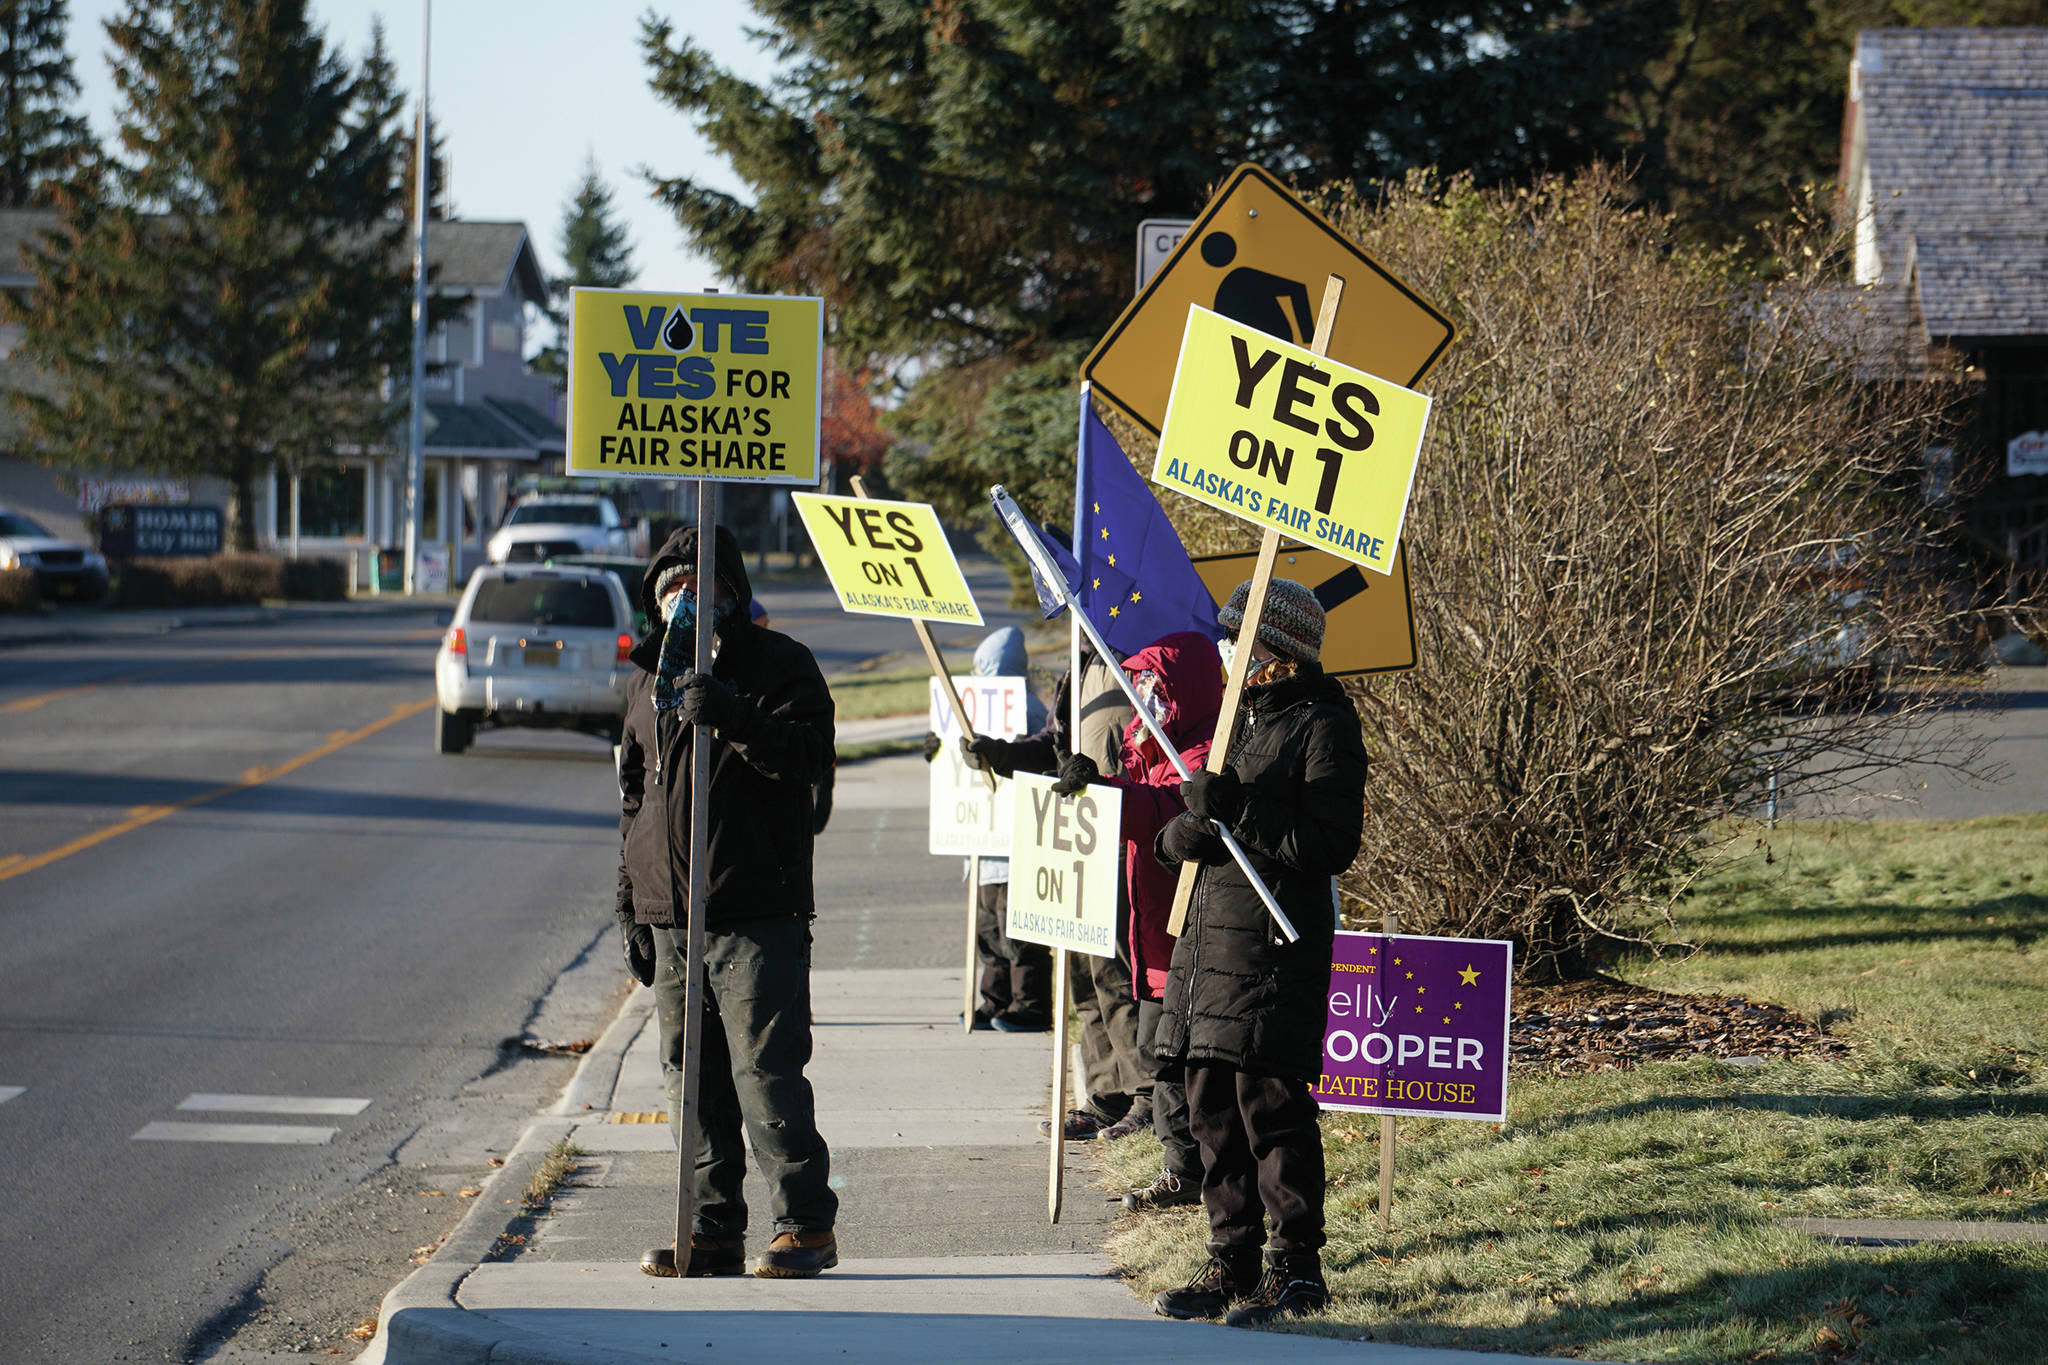 Supporters of Alaska Ballot Measure 1 wave signs urging a “yes” vote on Tuesday, Nov. 3, 2020, on Pioneer Avenue in Homer, Alaska. Ballot Measure 1 seeks to change the tax structure for some Alaska oil and gas production. (Photo by Michael Armstrong/Homer News)